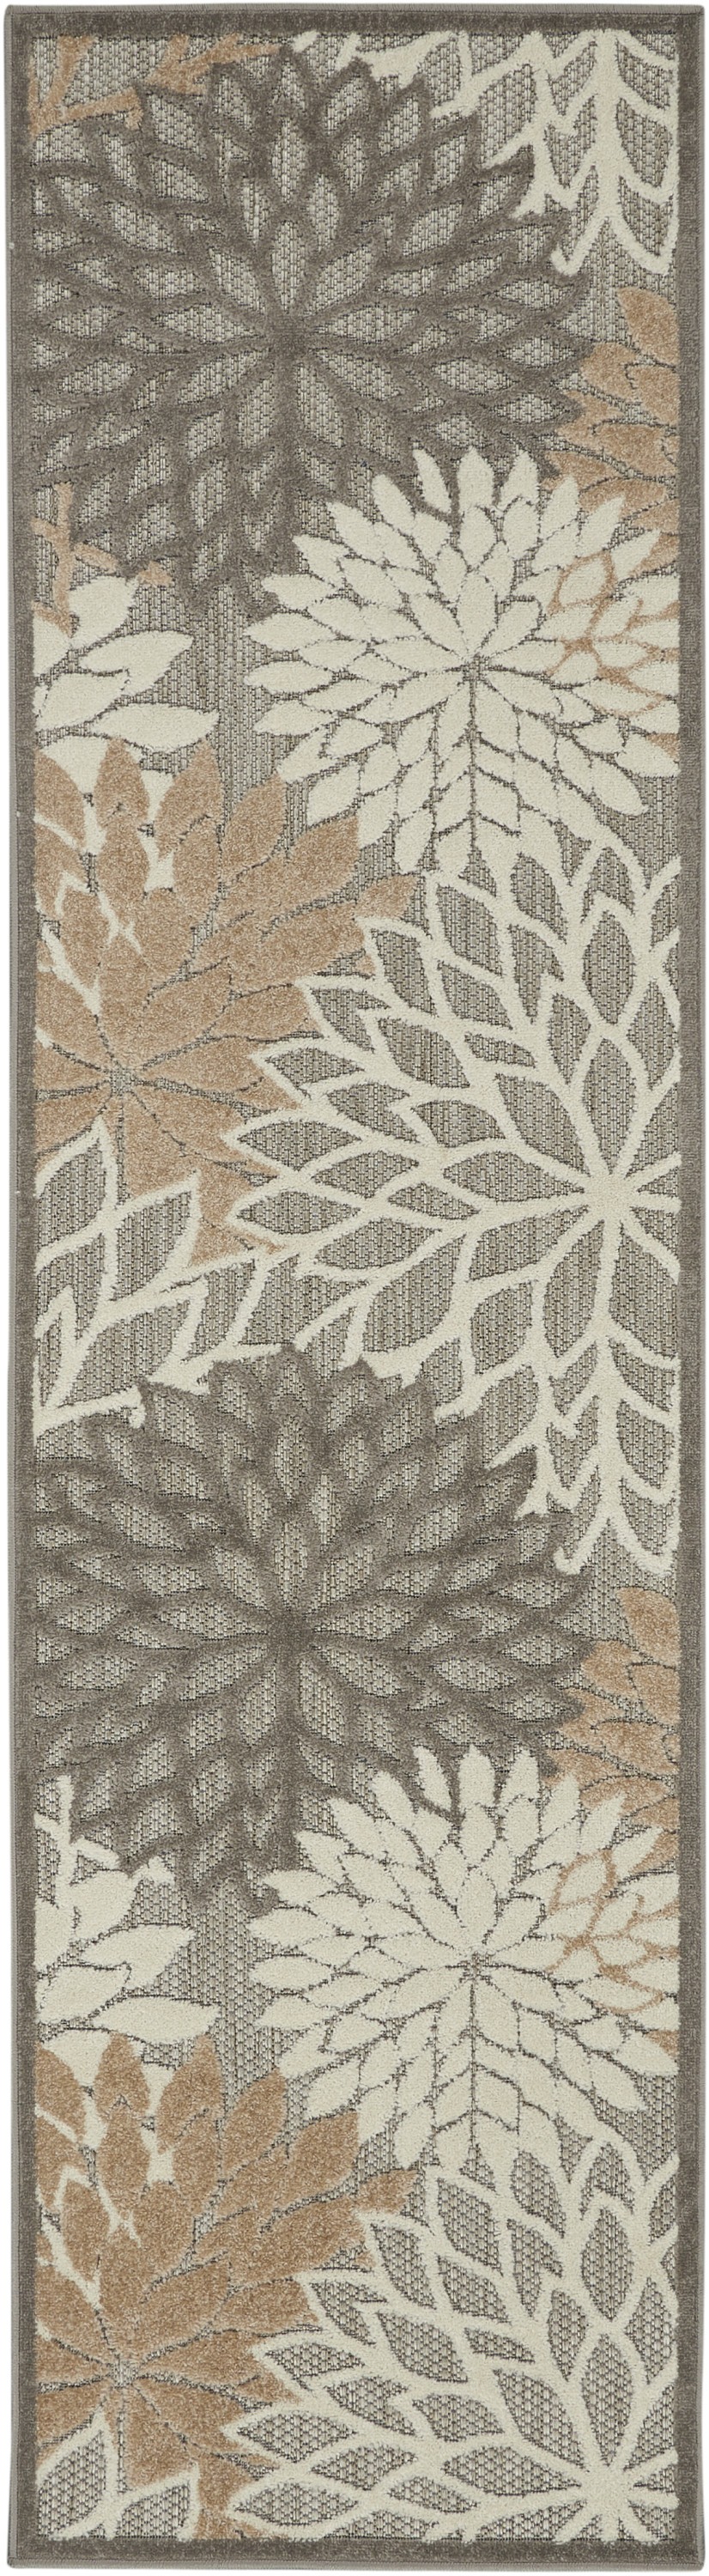 2' X 10' Gray And Ivory Floral Indoor Outdoor Area Rug-384654-1